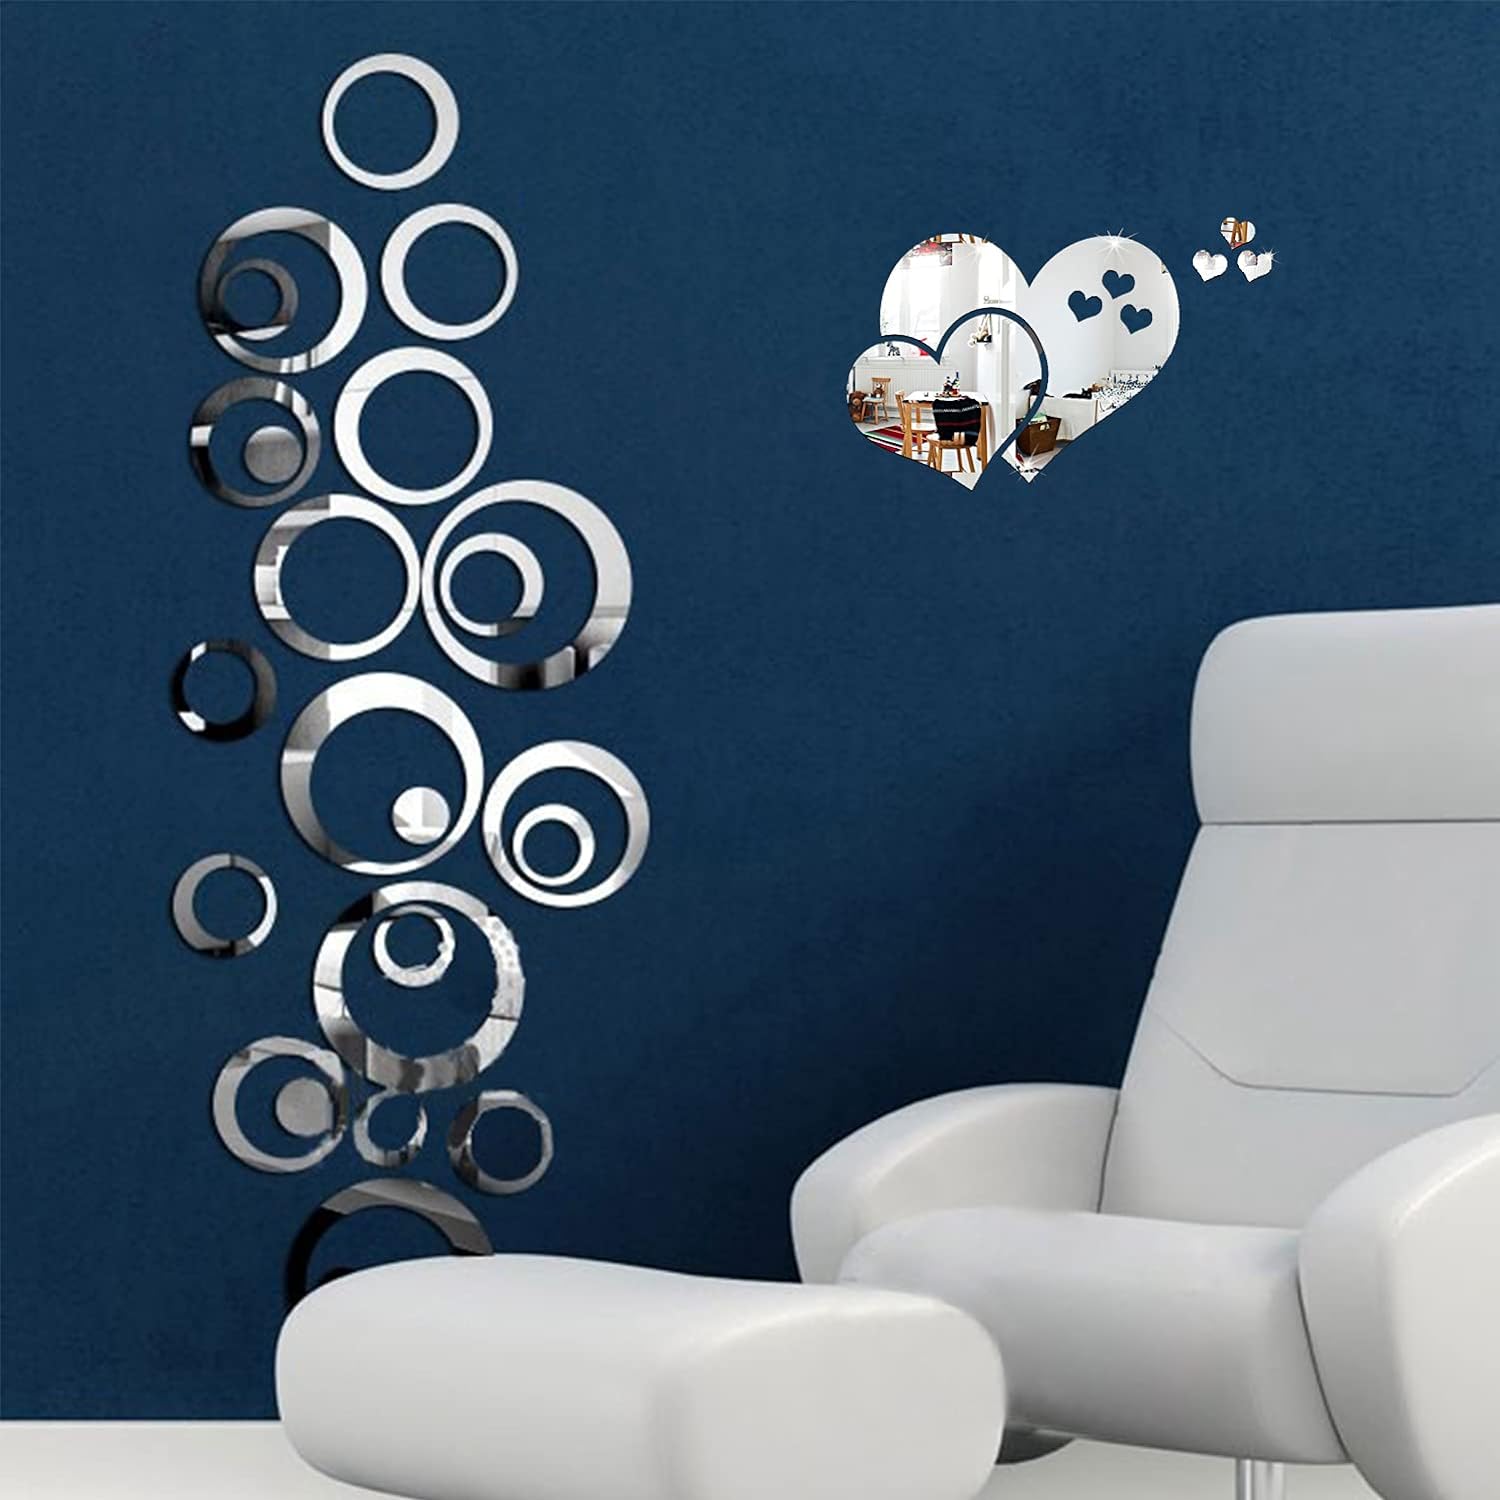 ELANE 29PCS DIY Mirror Wall Decals,Including 24PCS Circle Mirror Wall Sticker Wall Decoration and 5 PCS Heart Removable Self Adhesive Mirror Decal for Home Decoration Office Living Room Bedroom